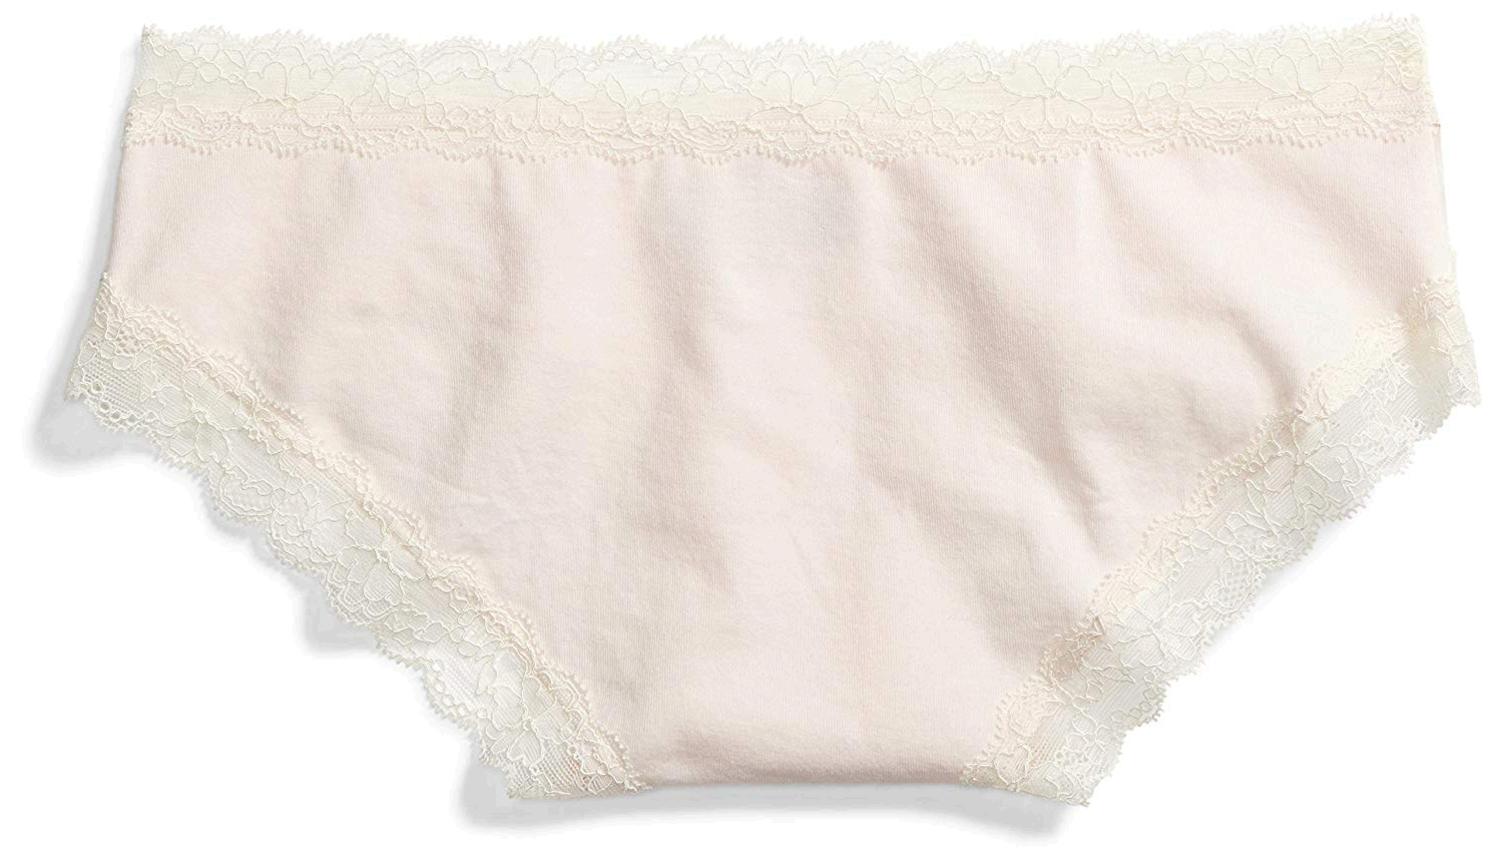 Assorted X-Large Mae Womens Super Soft Cotton Lace Thong Brand 3 Pack